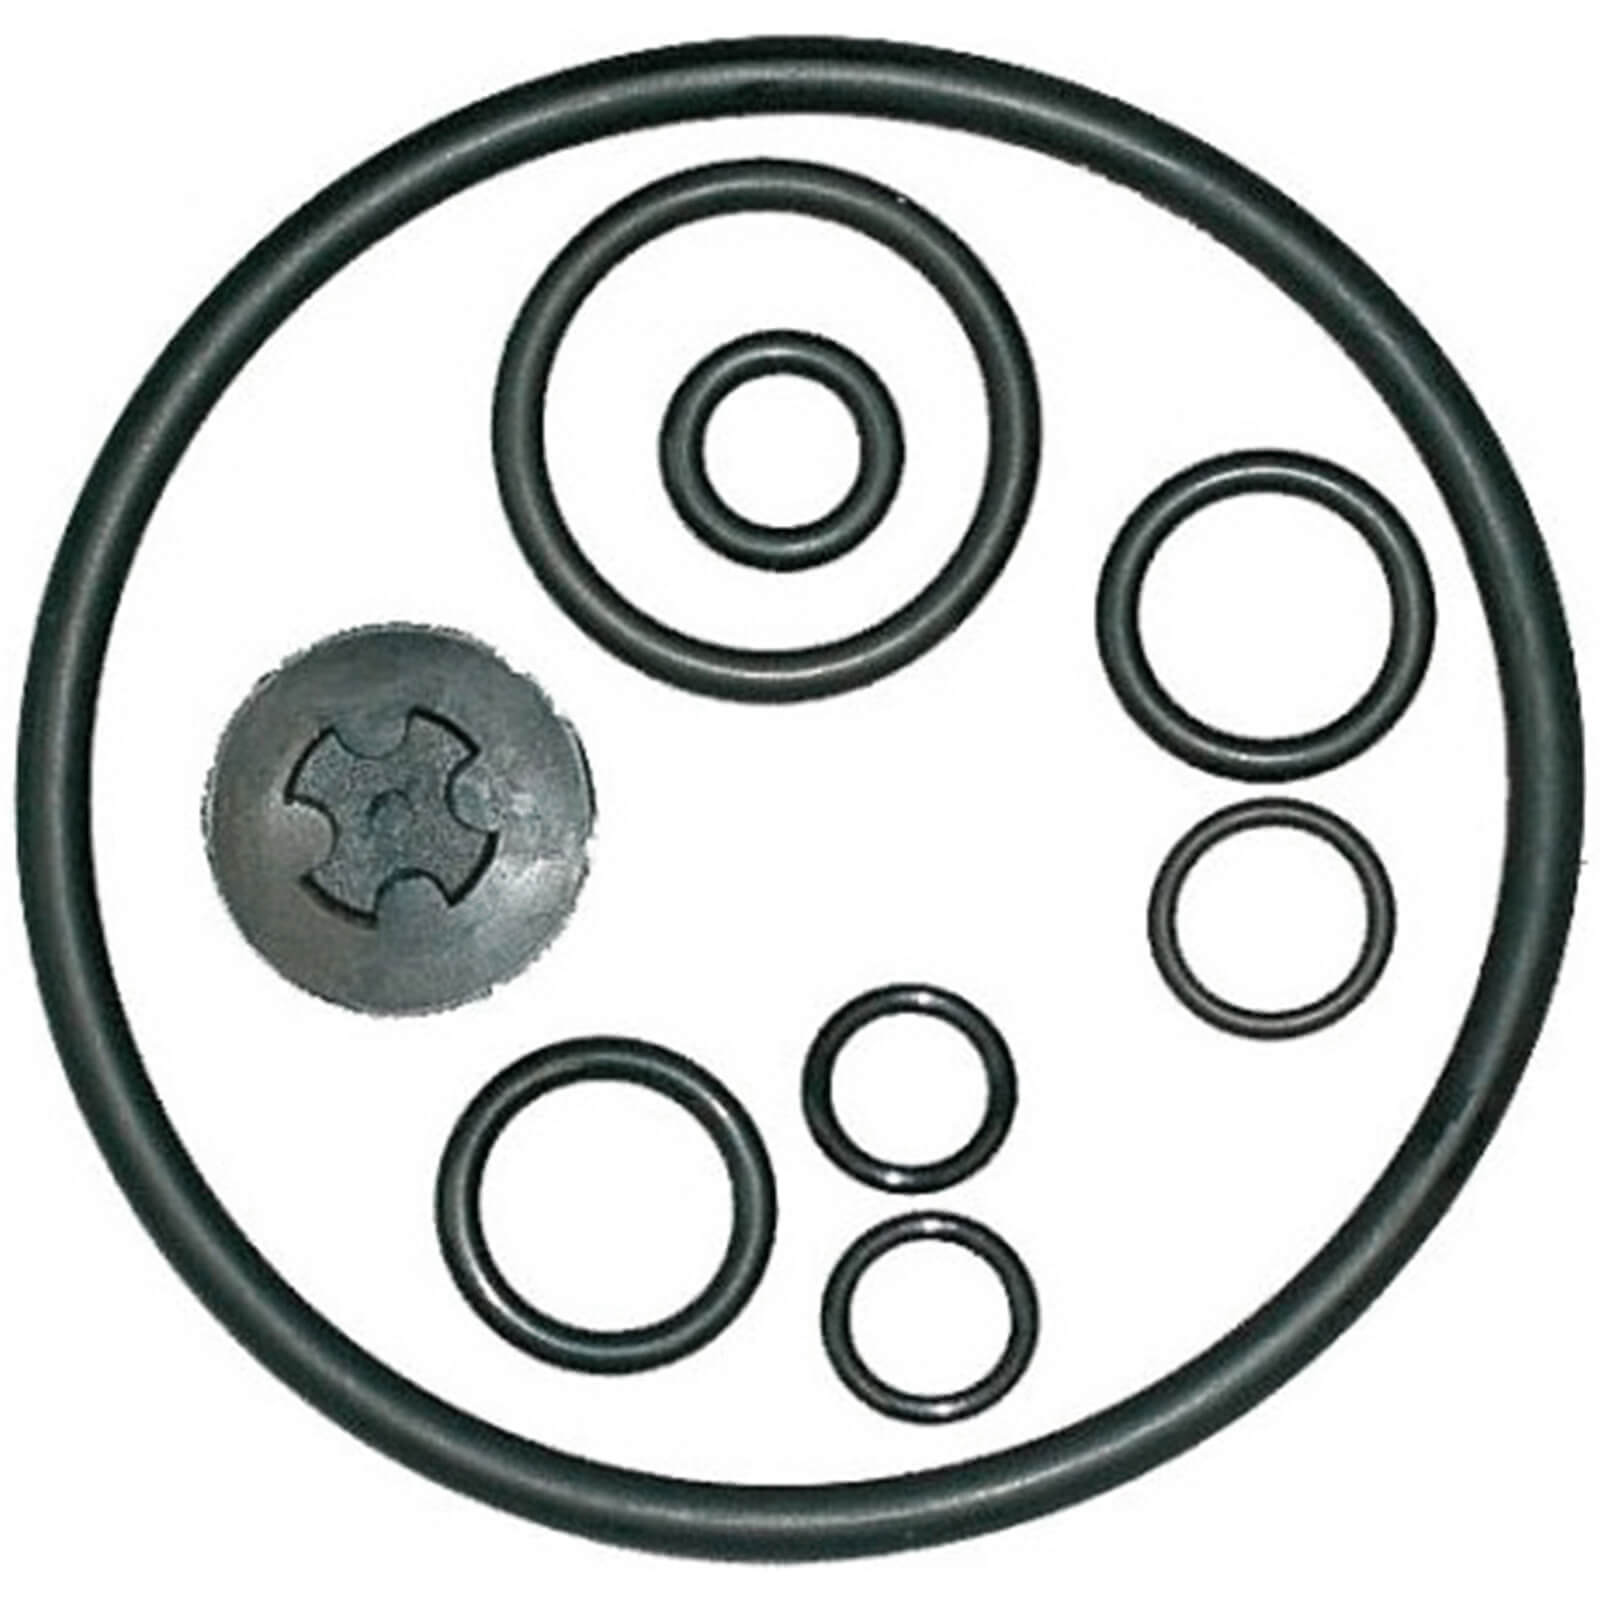 Solo FKM Gasket Kit for 456,457 and 456Pro Pressure Sprayers